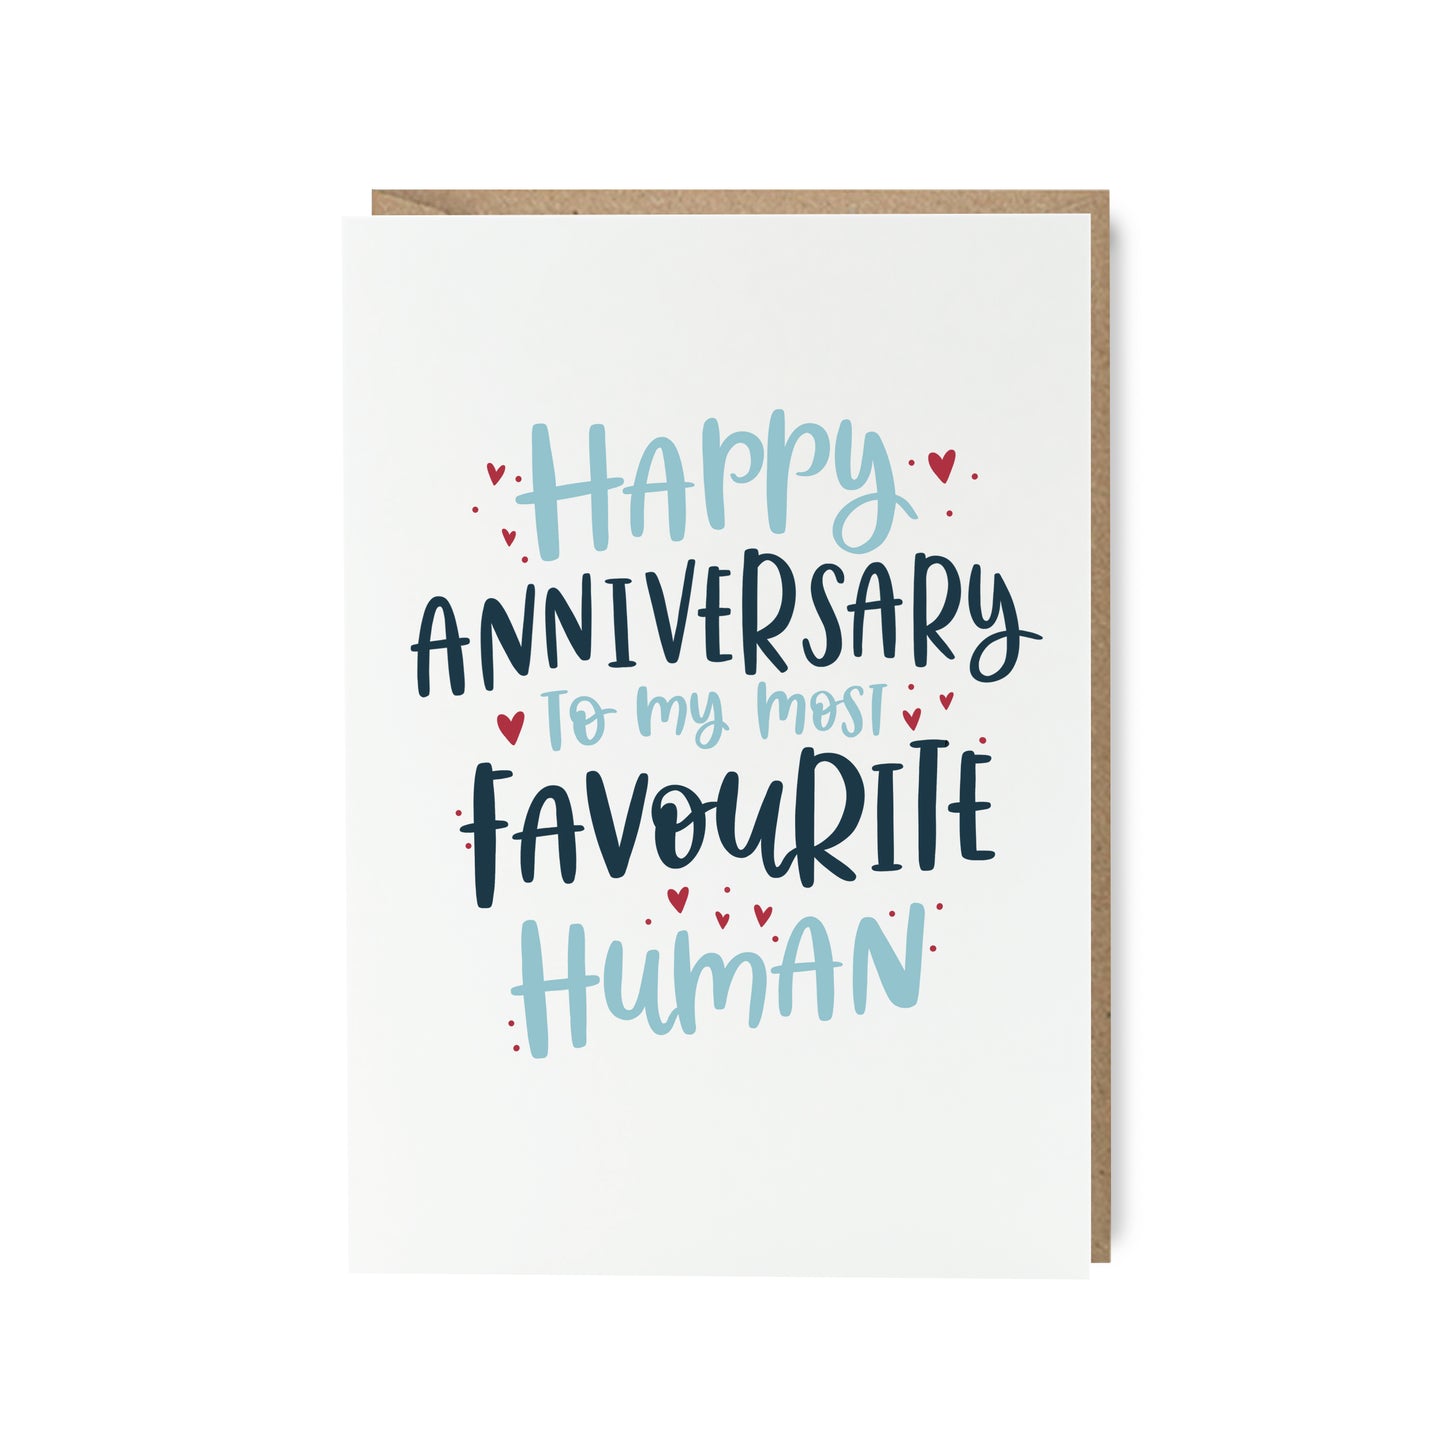 Favourite Human anniversary card by abbie imagine